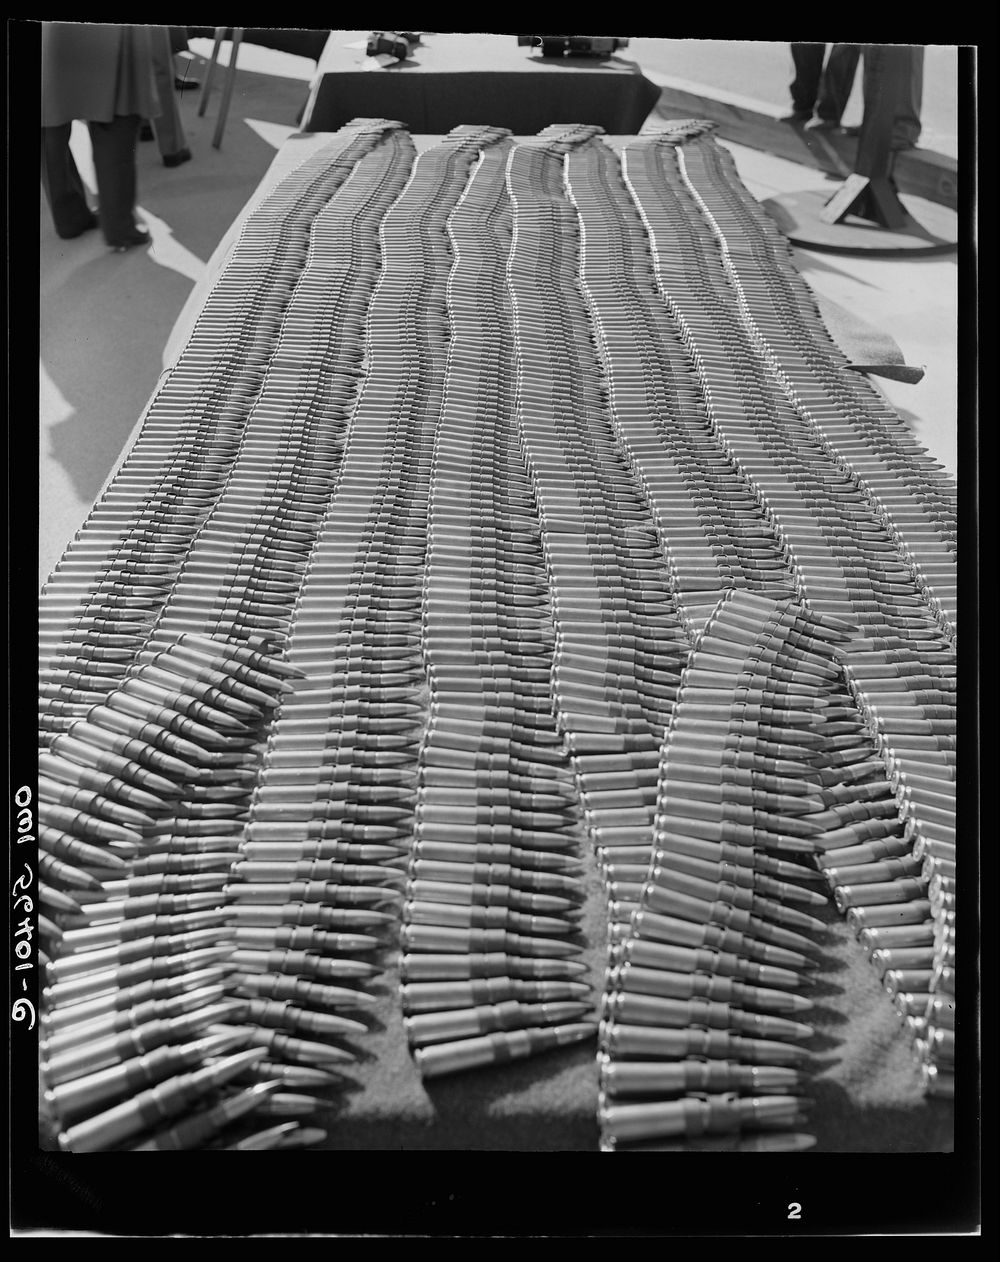 B-29 Super Fortress machine gun ammunition. Sourced from the Library of Congress.